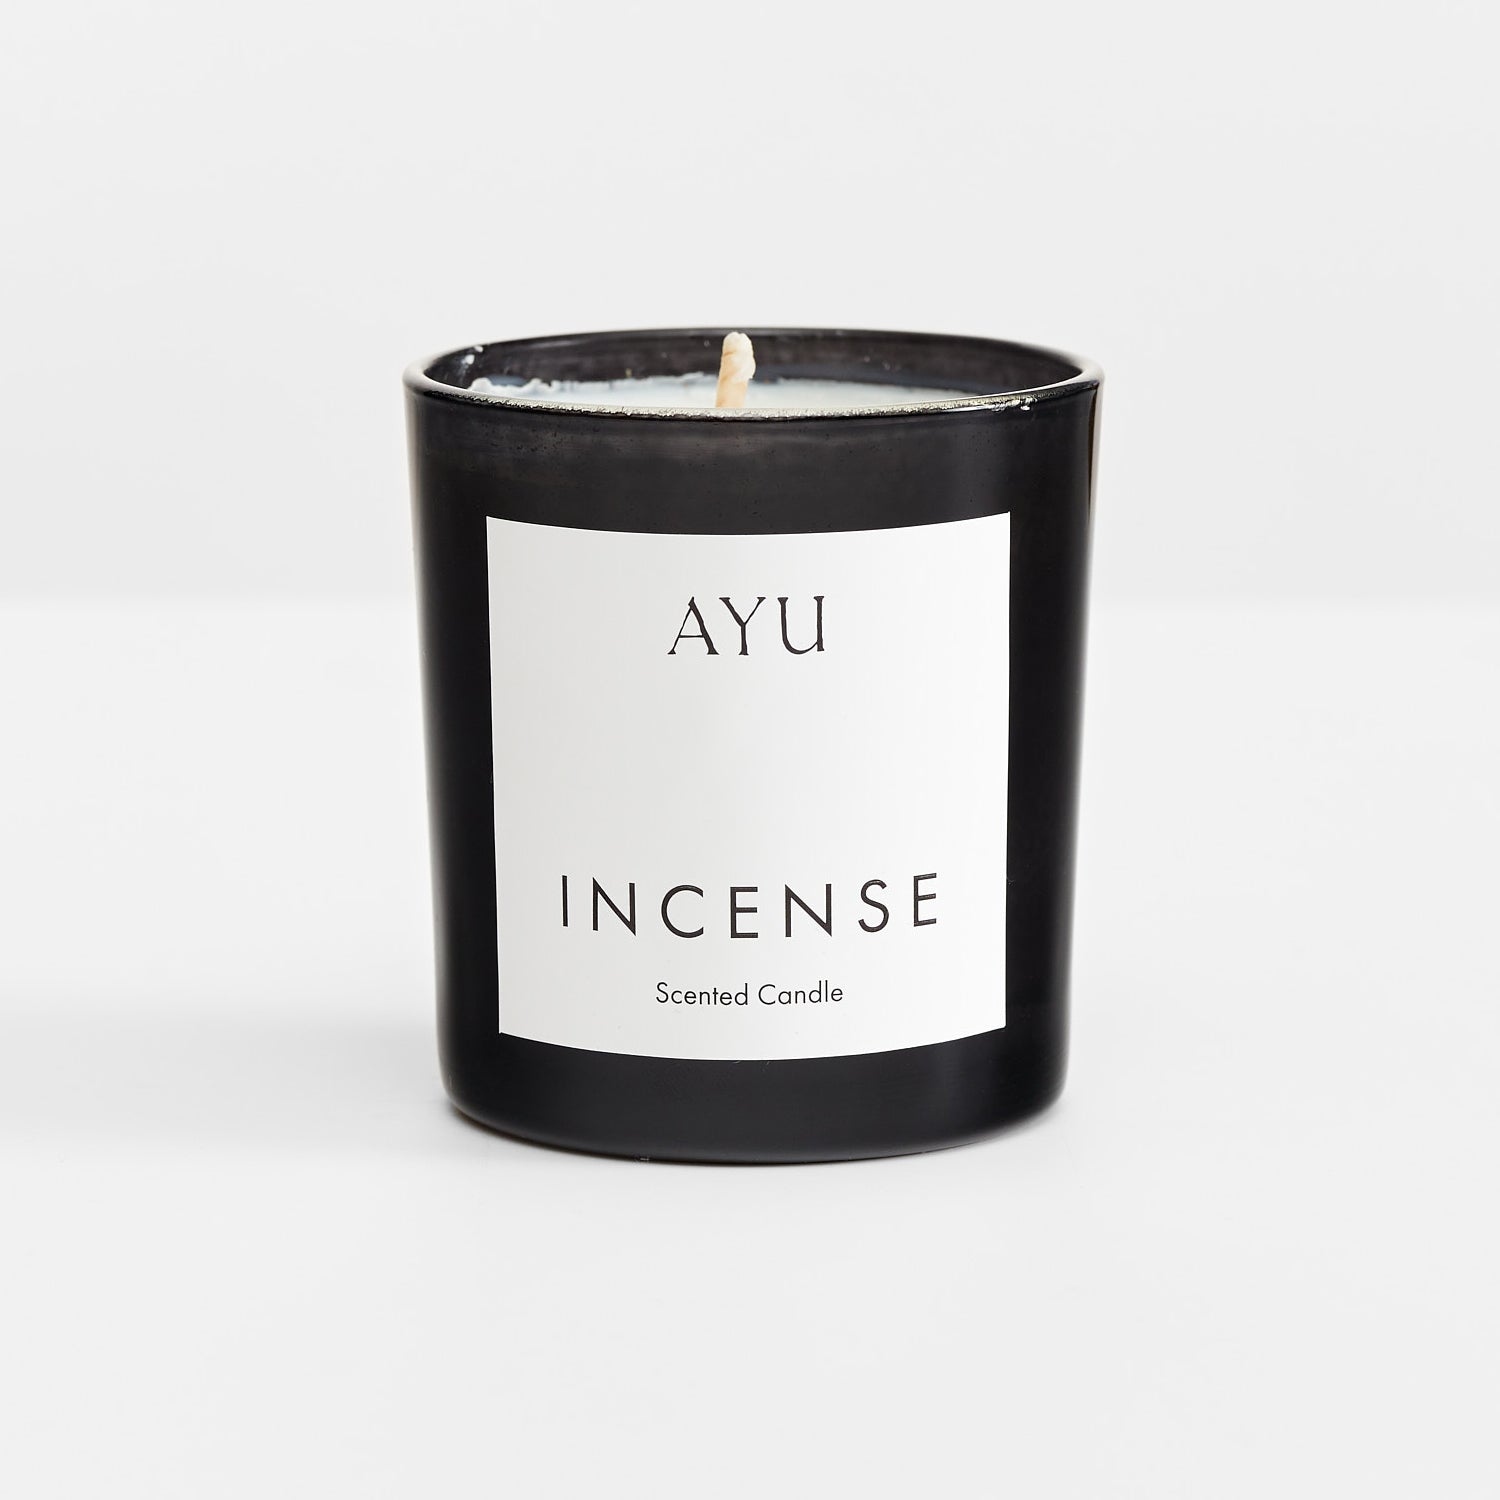 AYU Incense Scented Candle